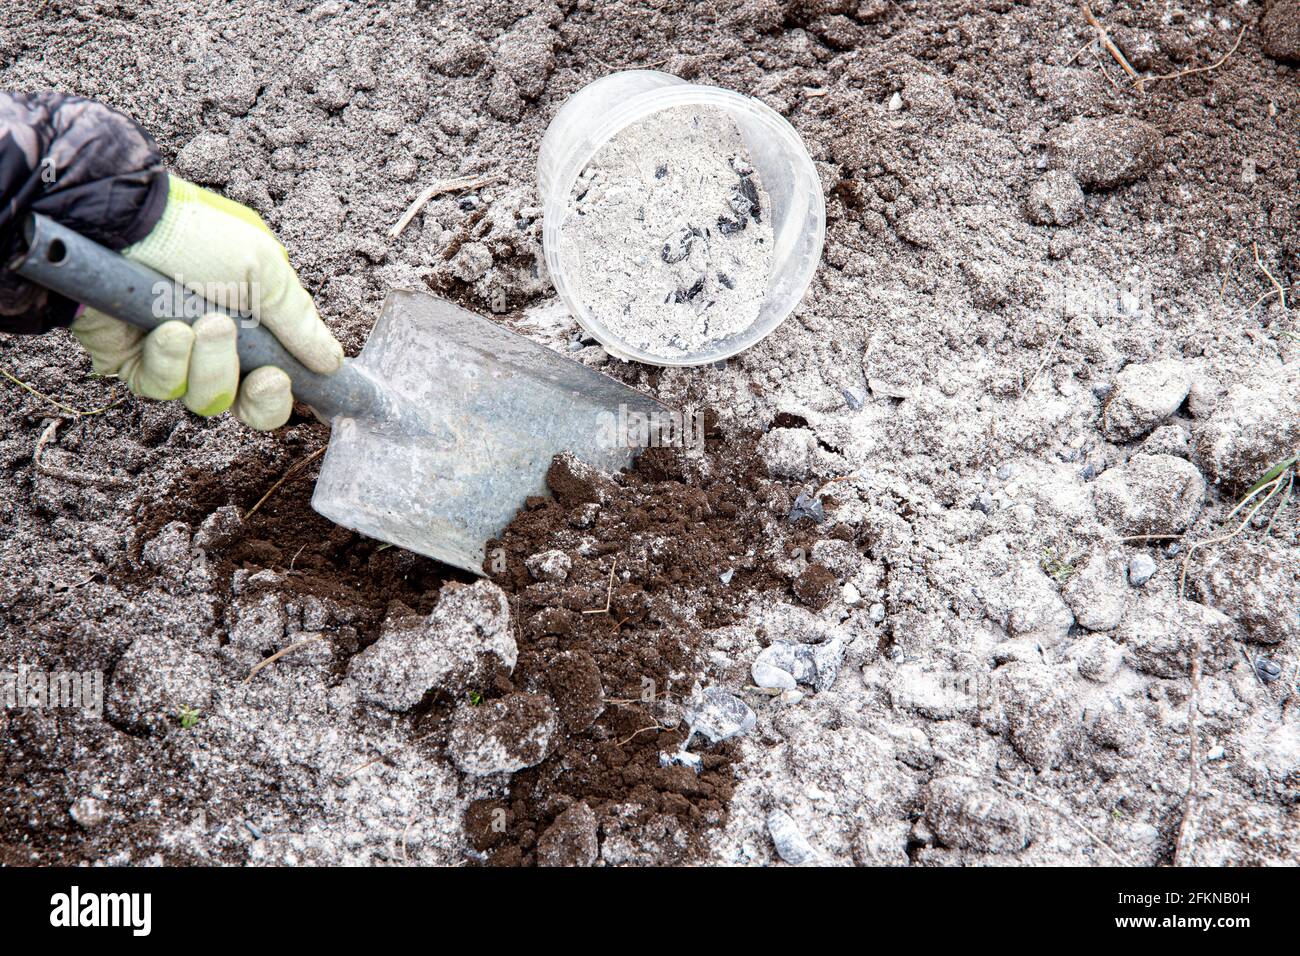 Gardener mixing wood burn ash powder in garden black soil to fertilize soil and give nutrients for plants concept. Stock Photo